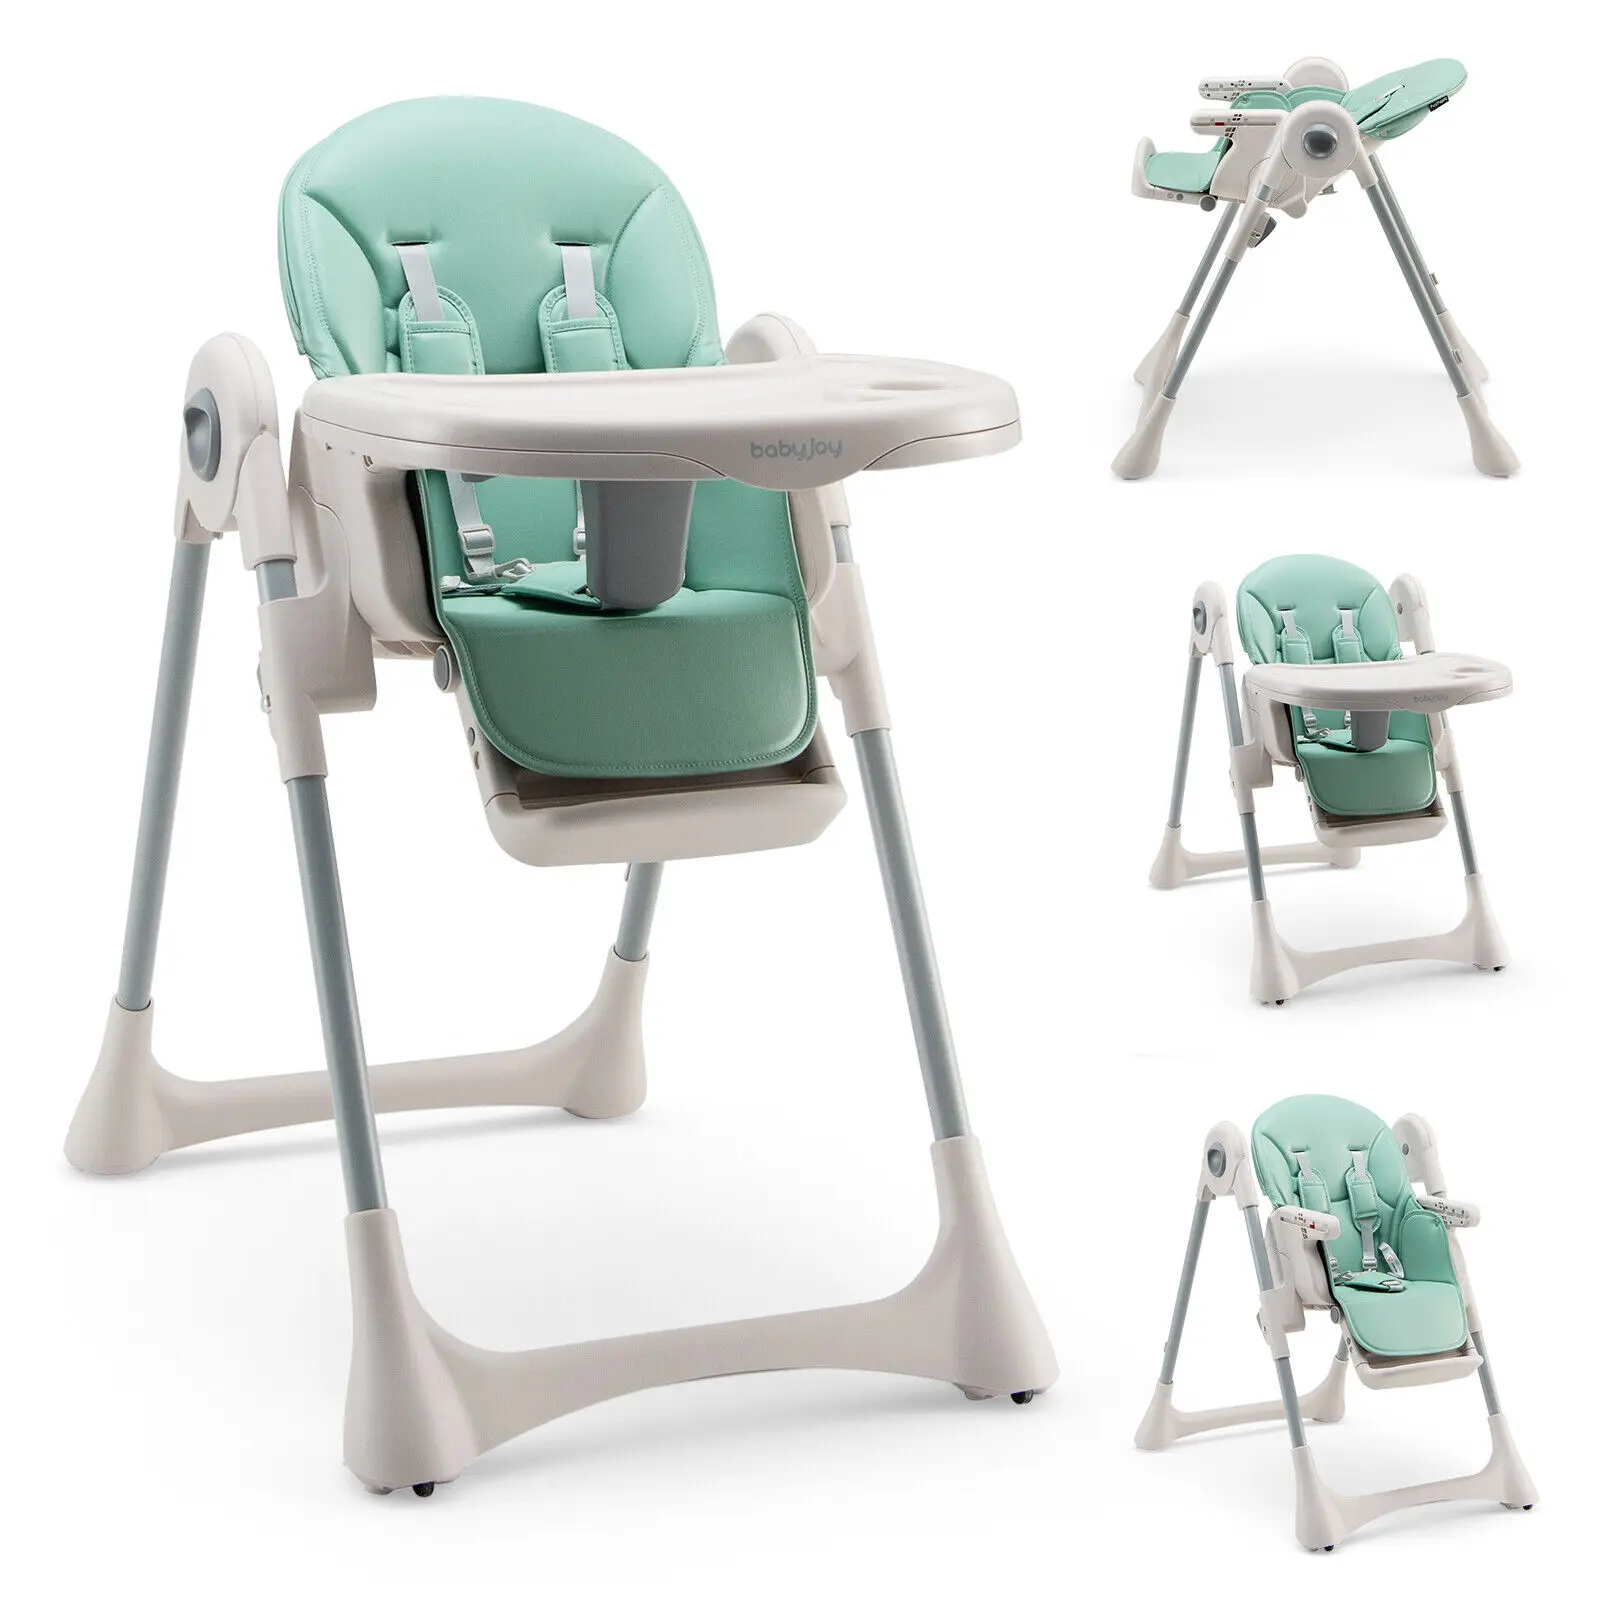 Babyjoy Baby High Chair Folding Baby Dining Chair w/ Adjustable Height & Footrest Green